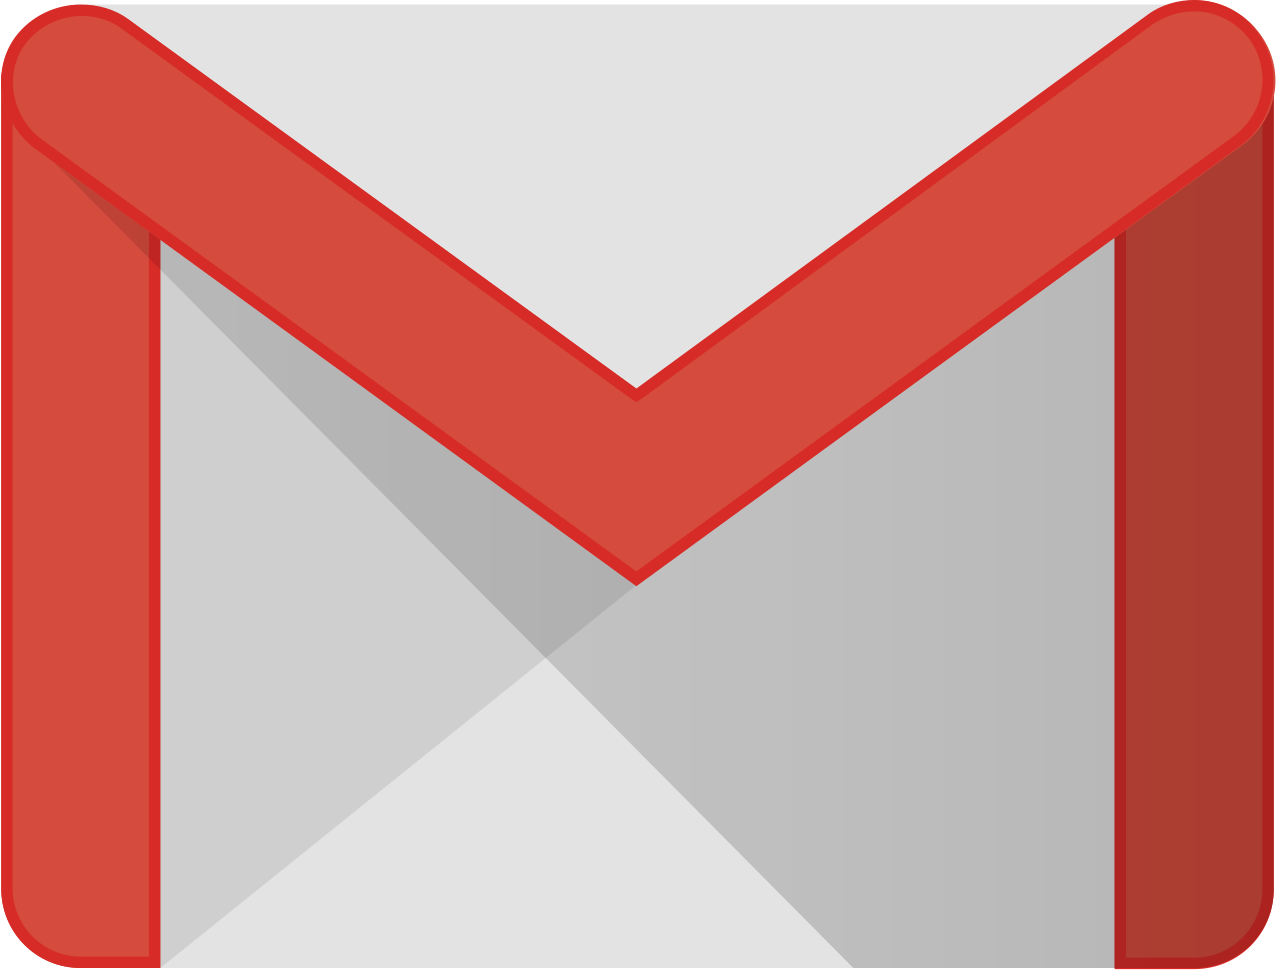 the logo of google email service